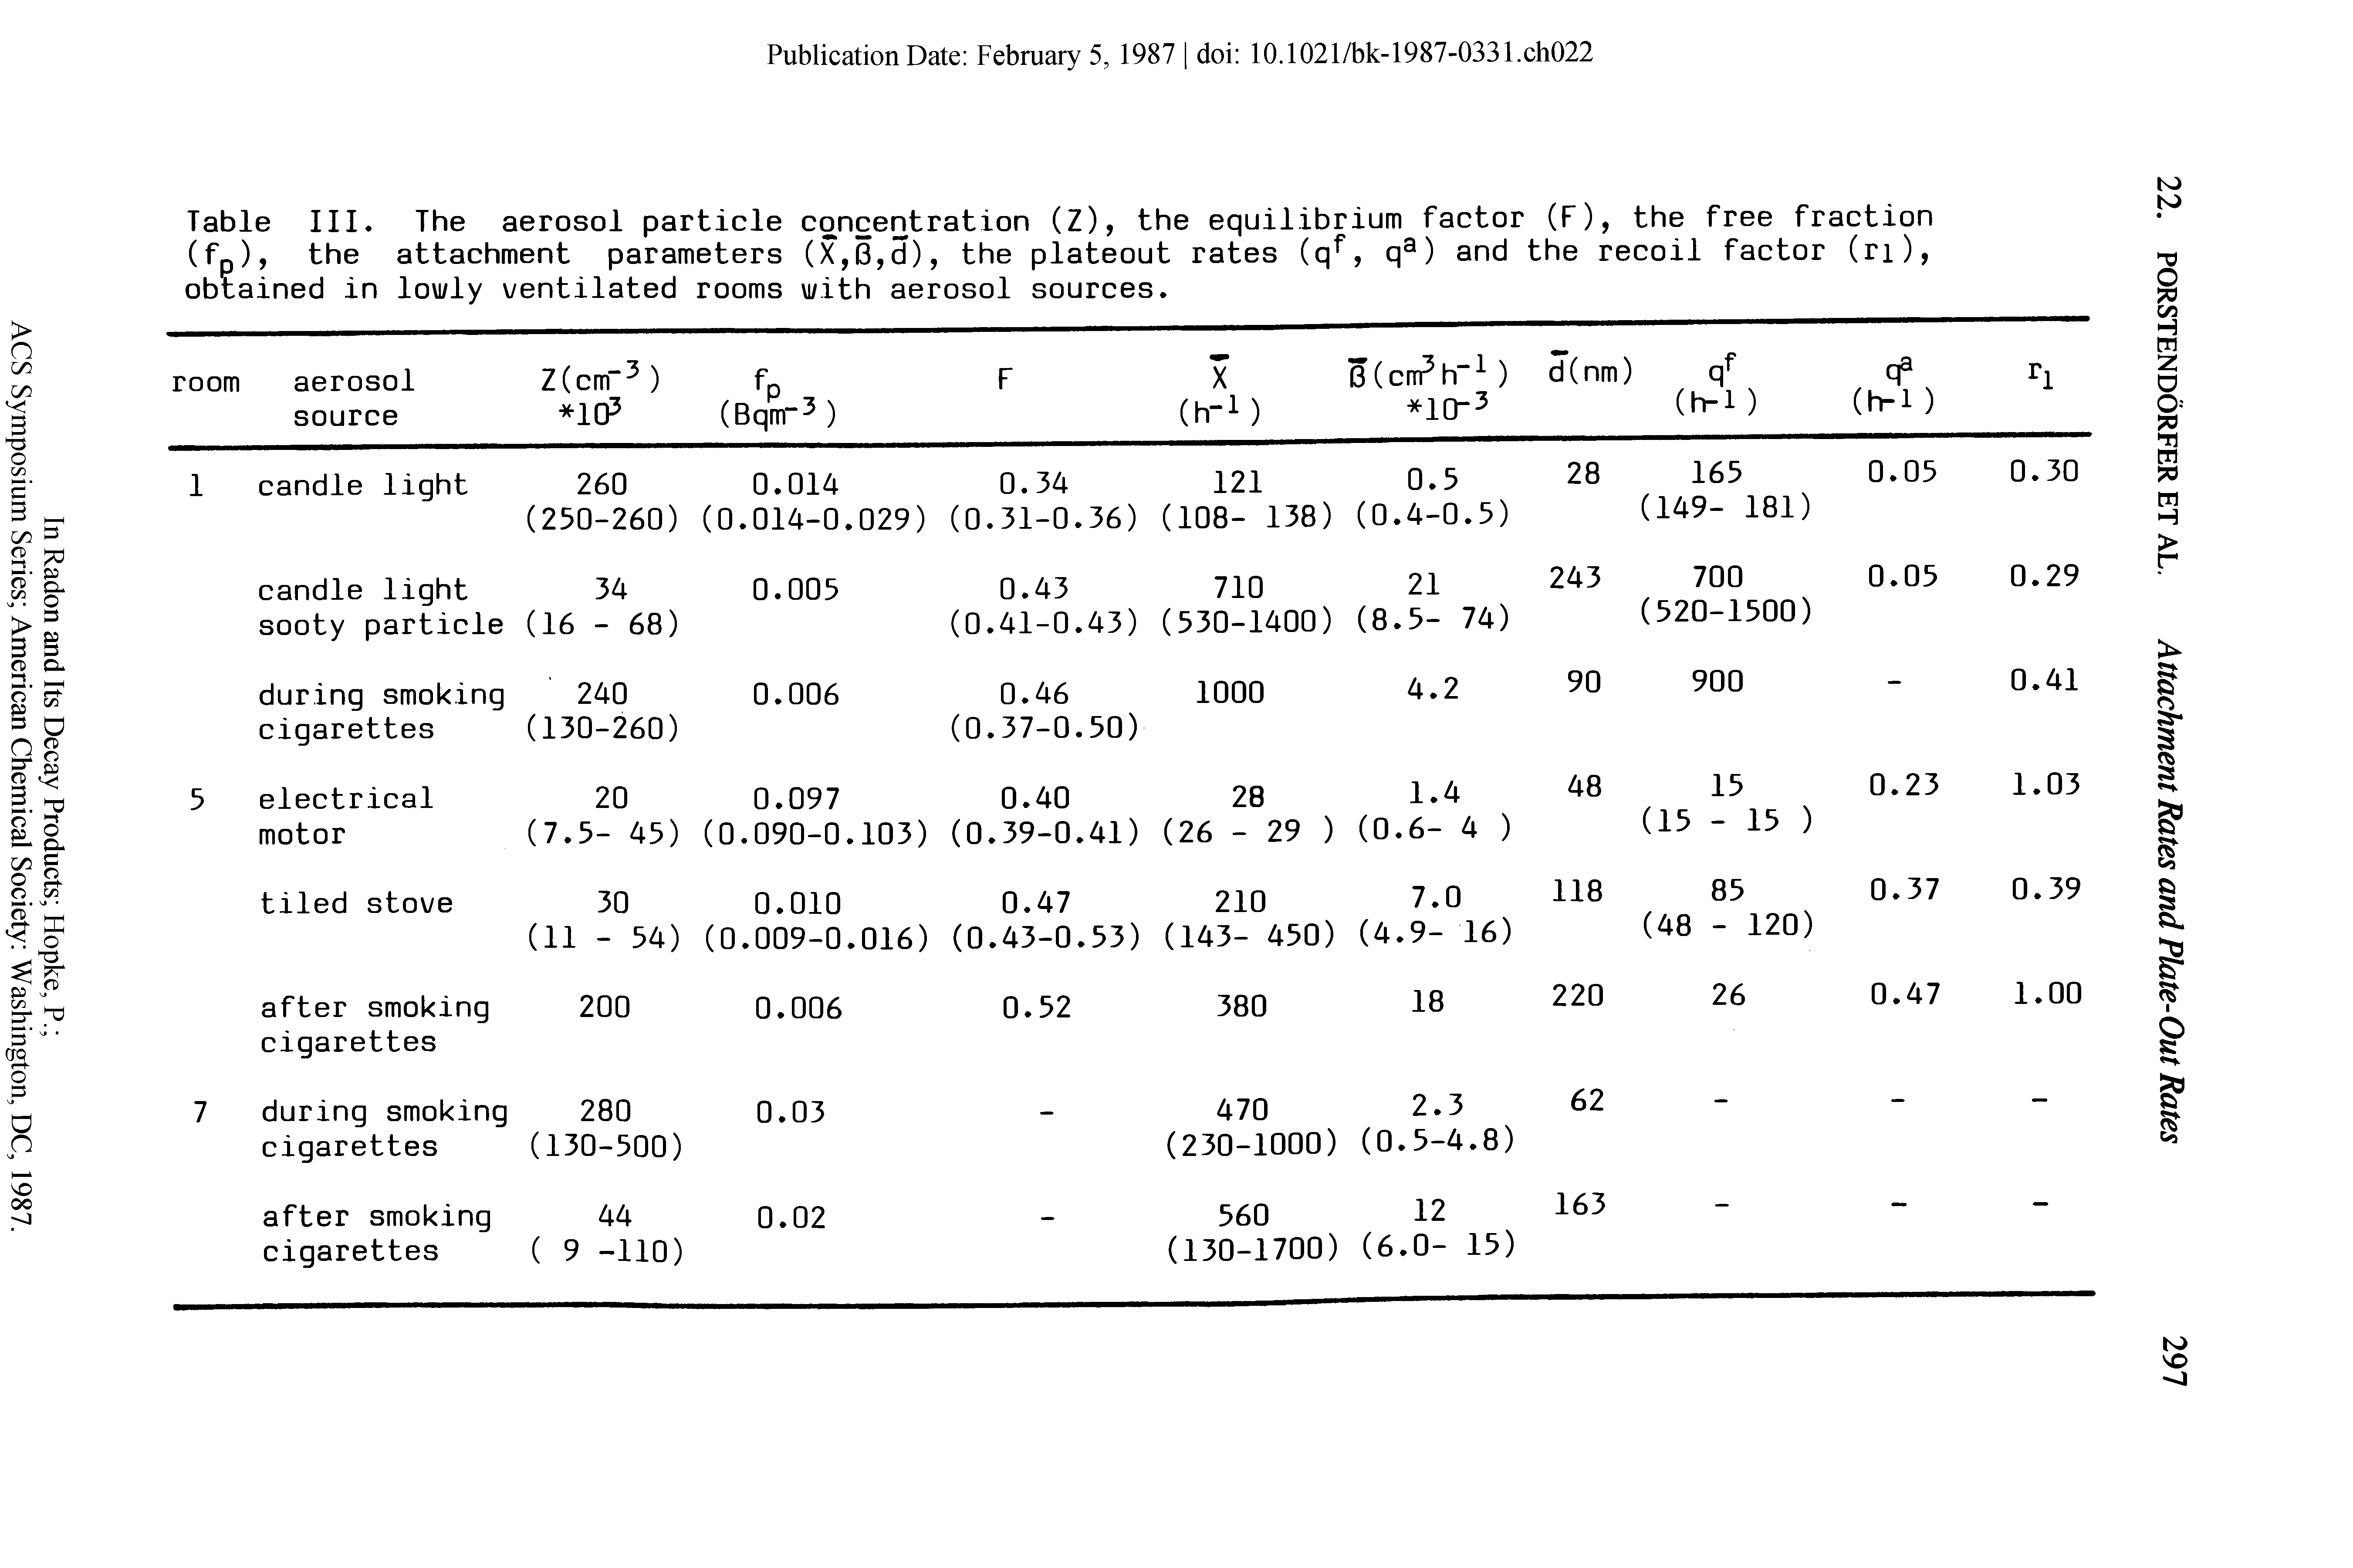 Table III. The aerosol particle concentration (Z), the equilibrium factor (F), the free fraction (fp), the attachment parameters (X,B,d), the plateout rates (qf, qa) and the recoil factor (ri), obtained in lowly ventilated rooms with aerosol sources.